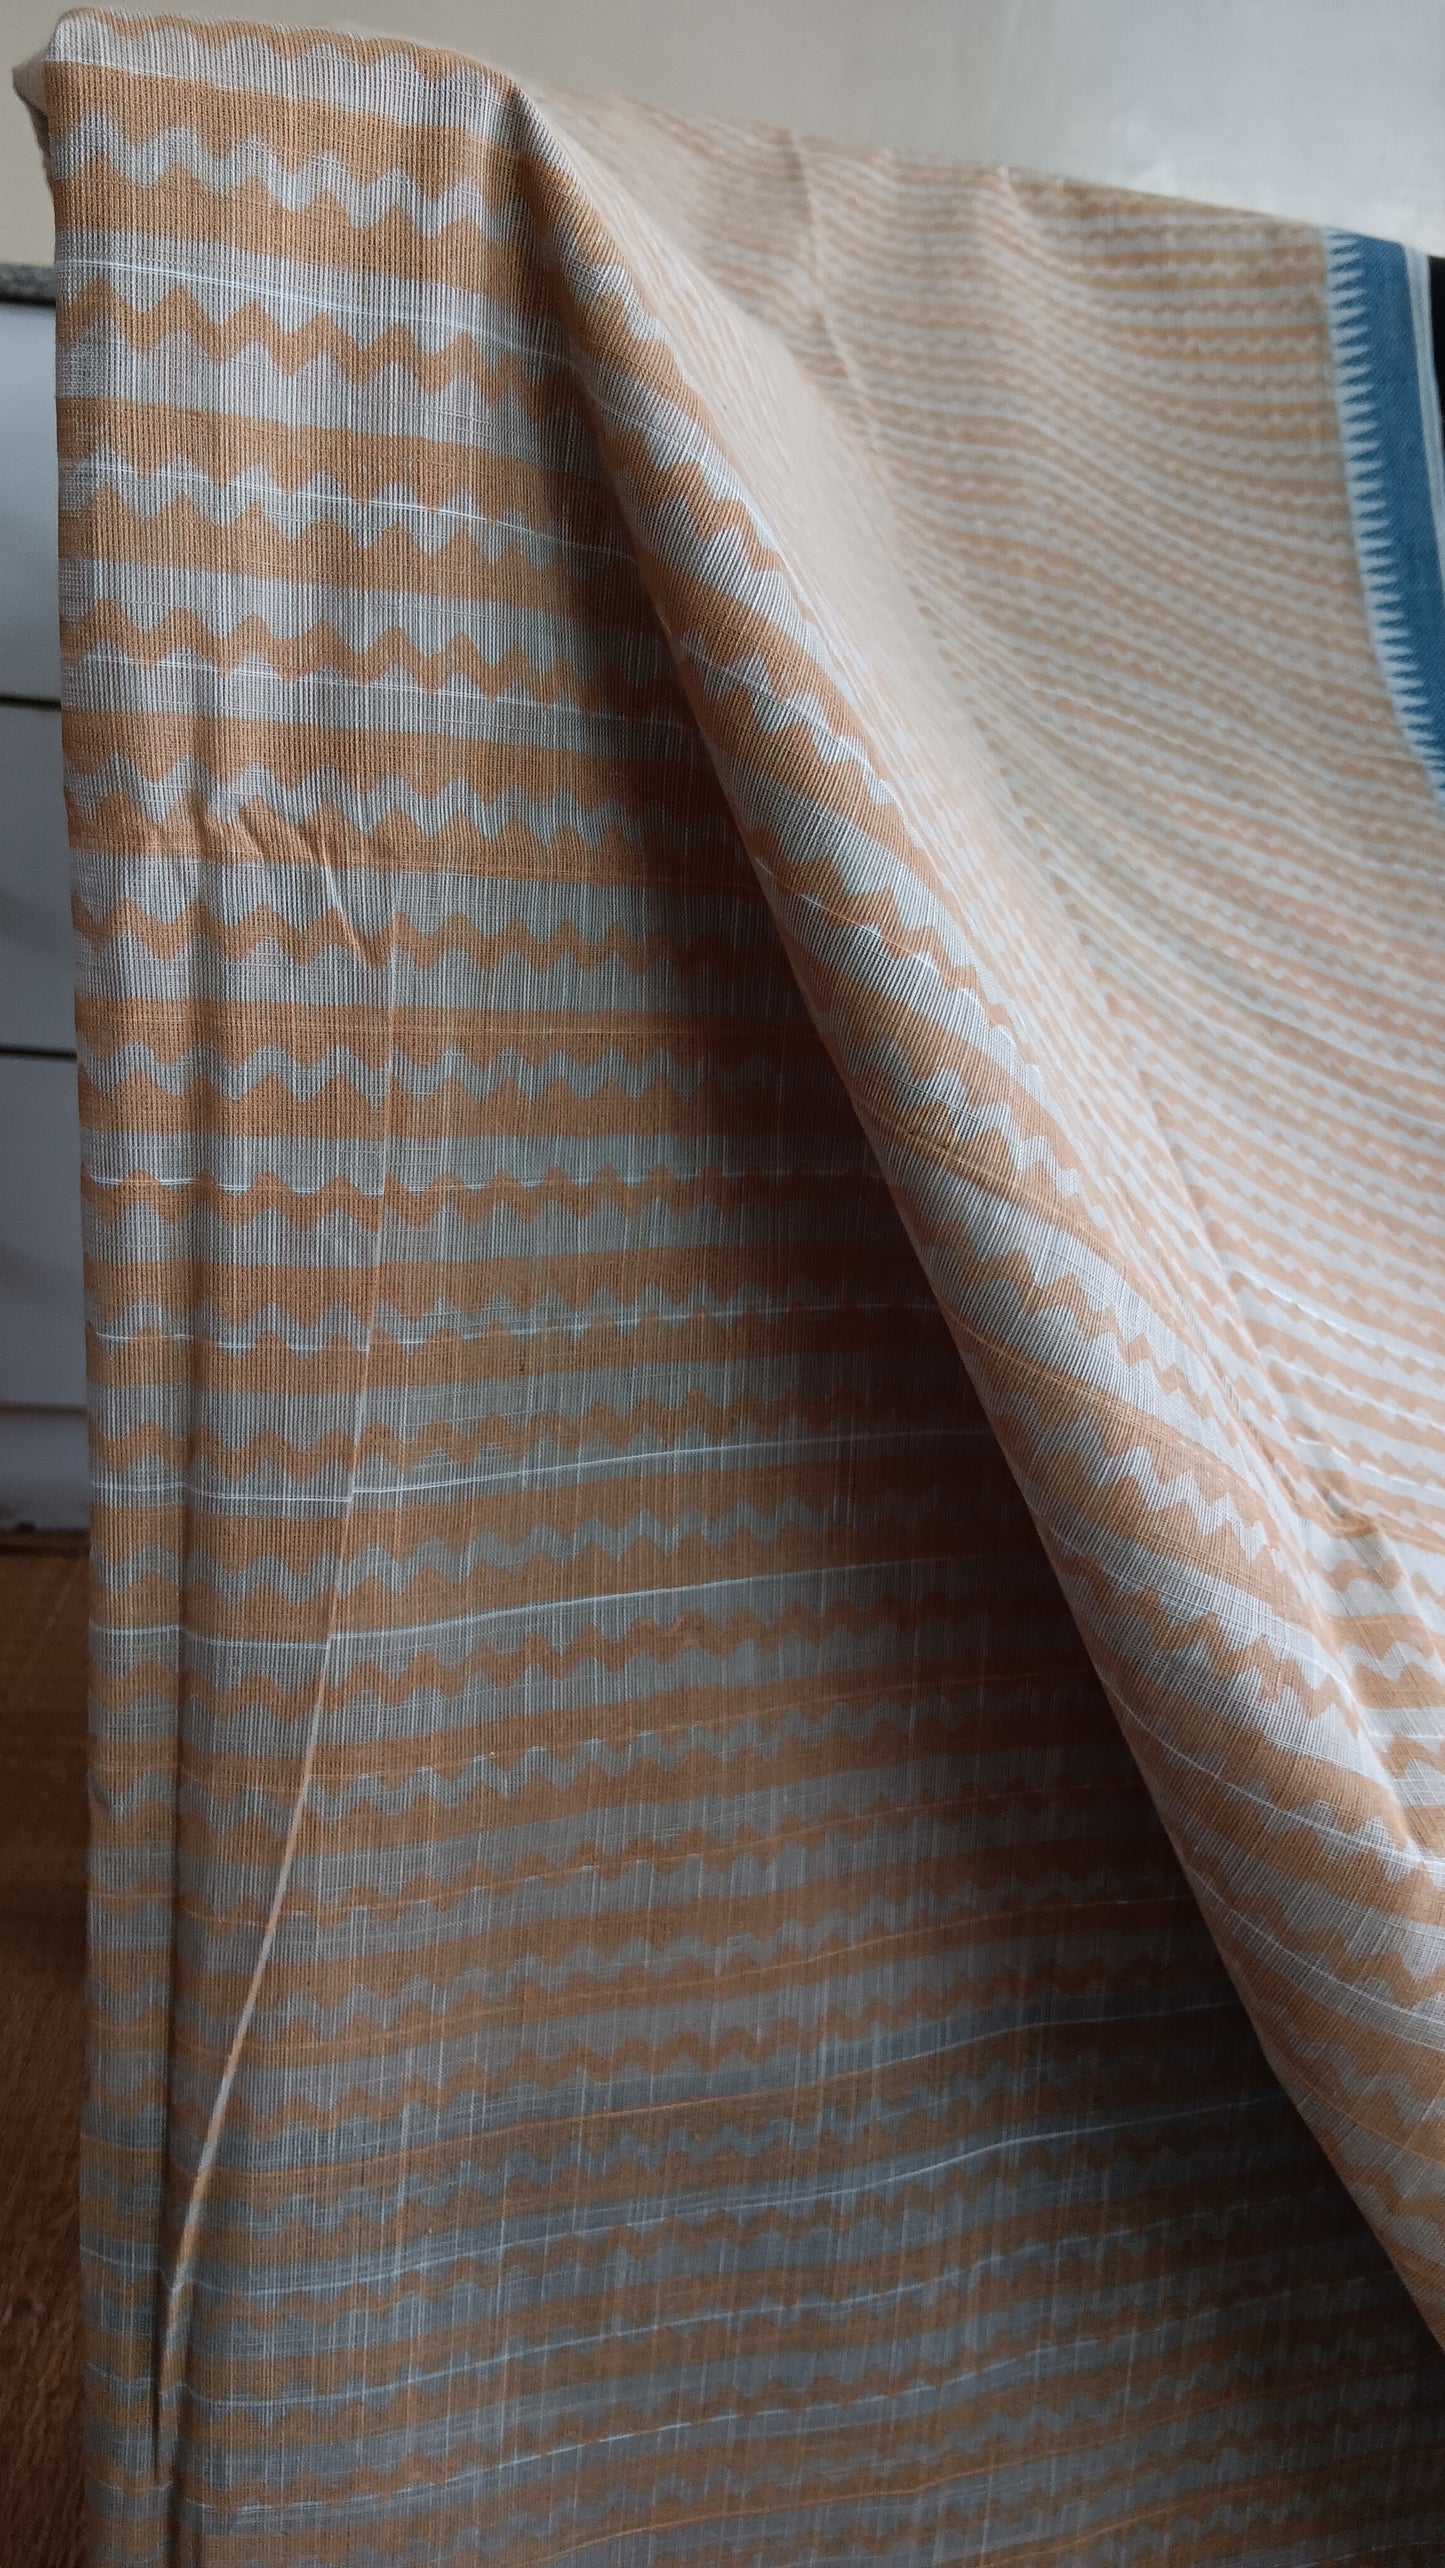 close up view of the geometric patterns block printed on the body of a daily wear cotton saree